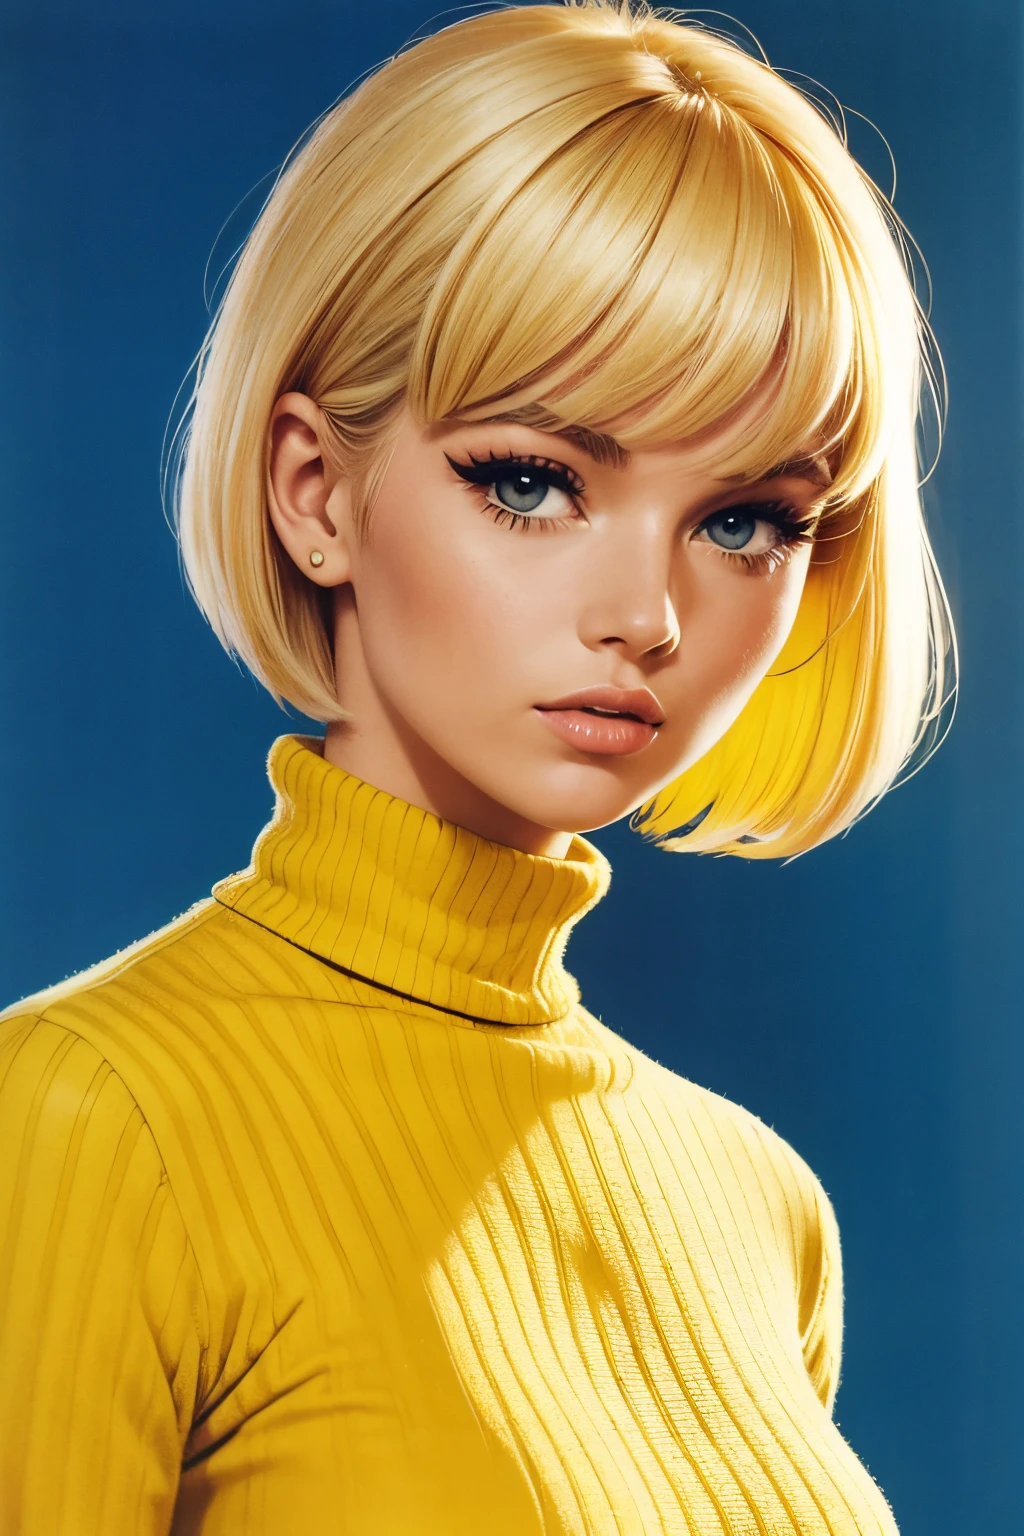 blond woman with short hair and a striped turtle neck shirt, a photo by Allan Linder, flickr, pop art, hair, 60s style, 6 0 s style, brigitte bardot, 1960s style, retro 6 0 s fashion, poppy, cut, medium yellow blond hair, pixie, yellow hair